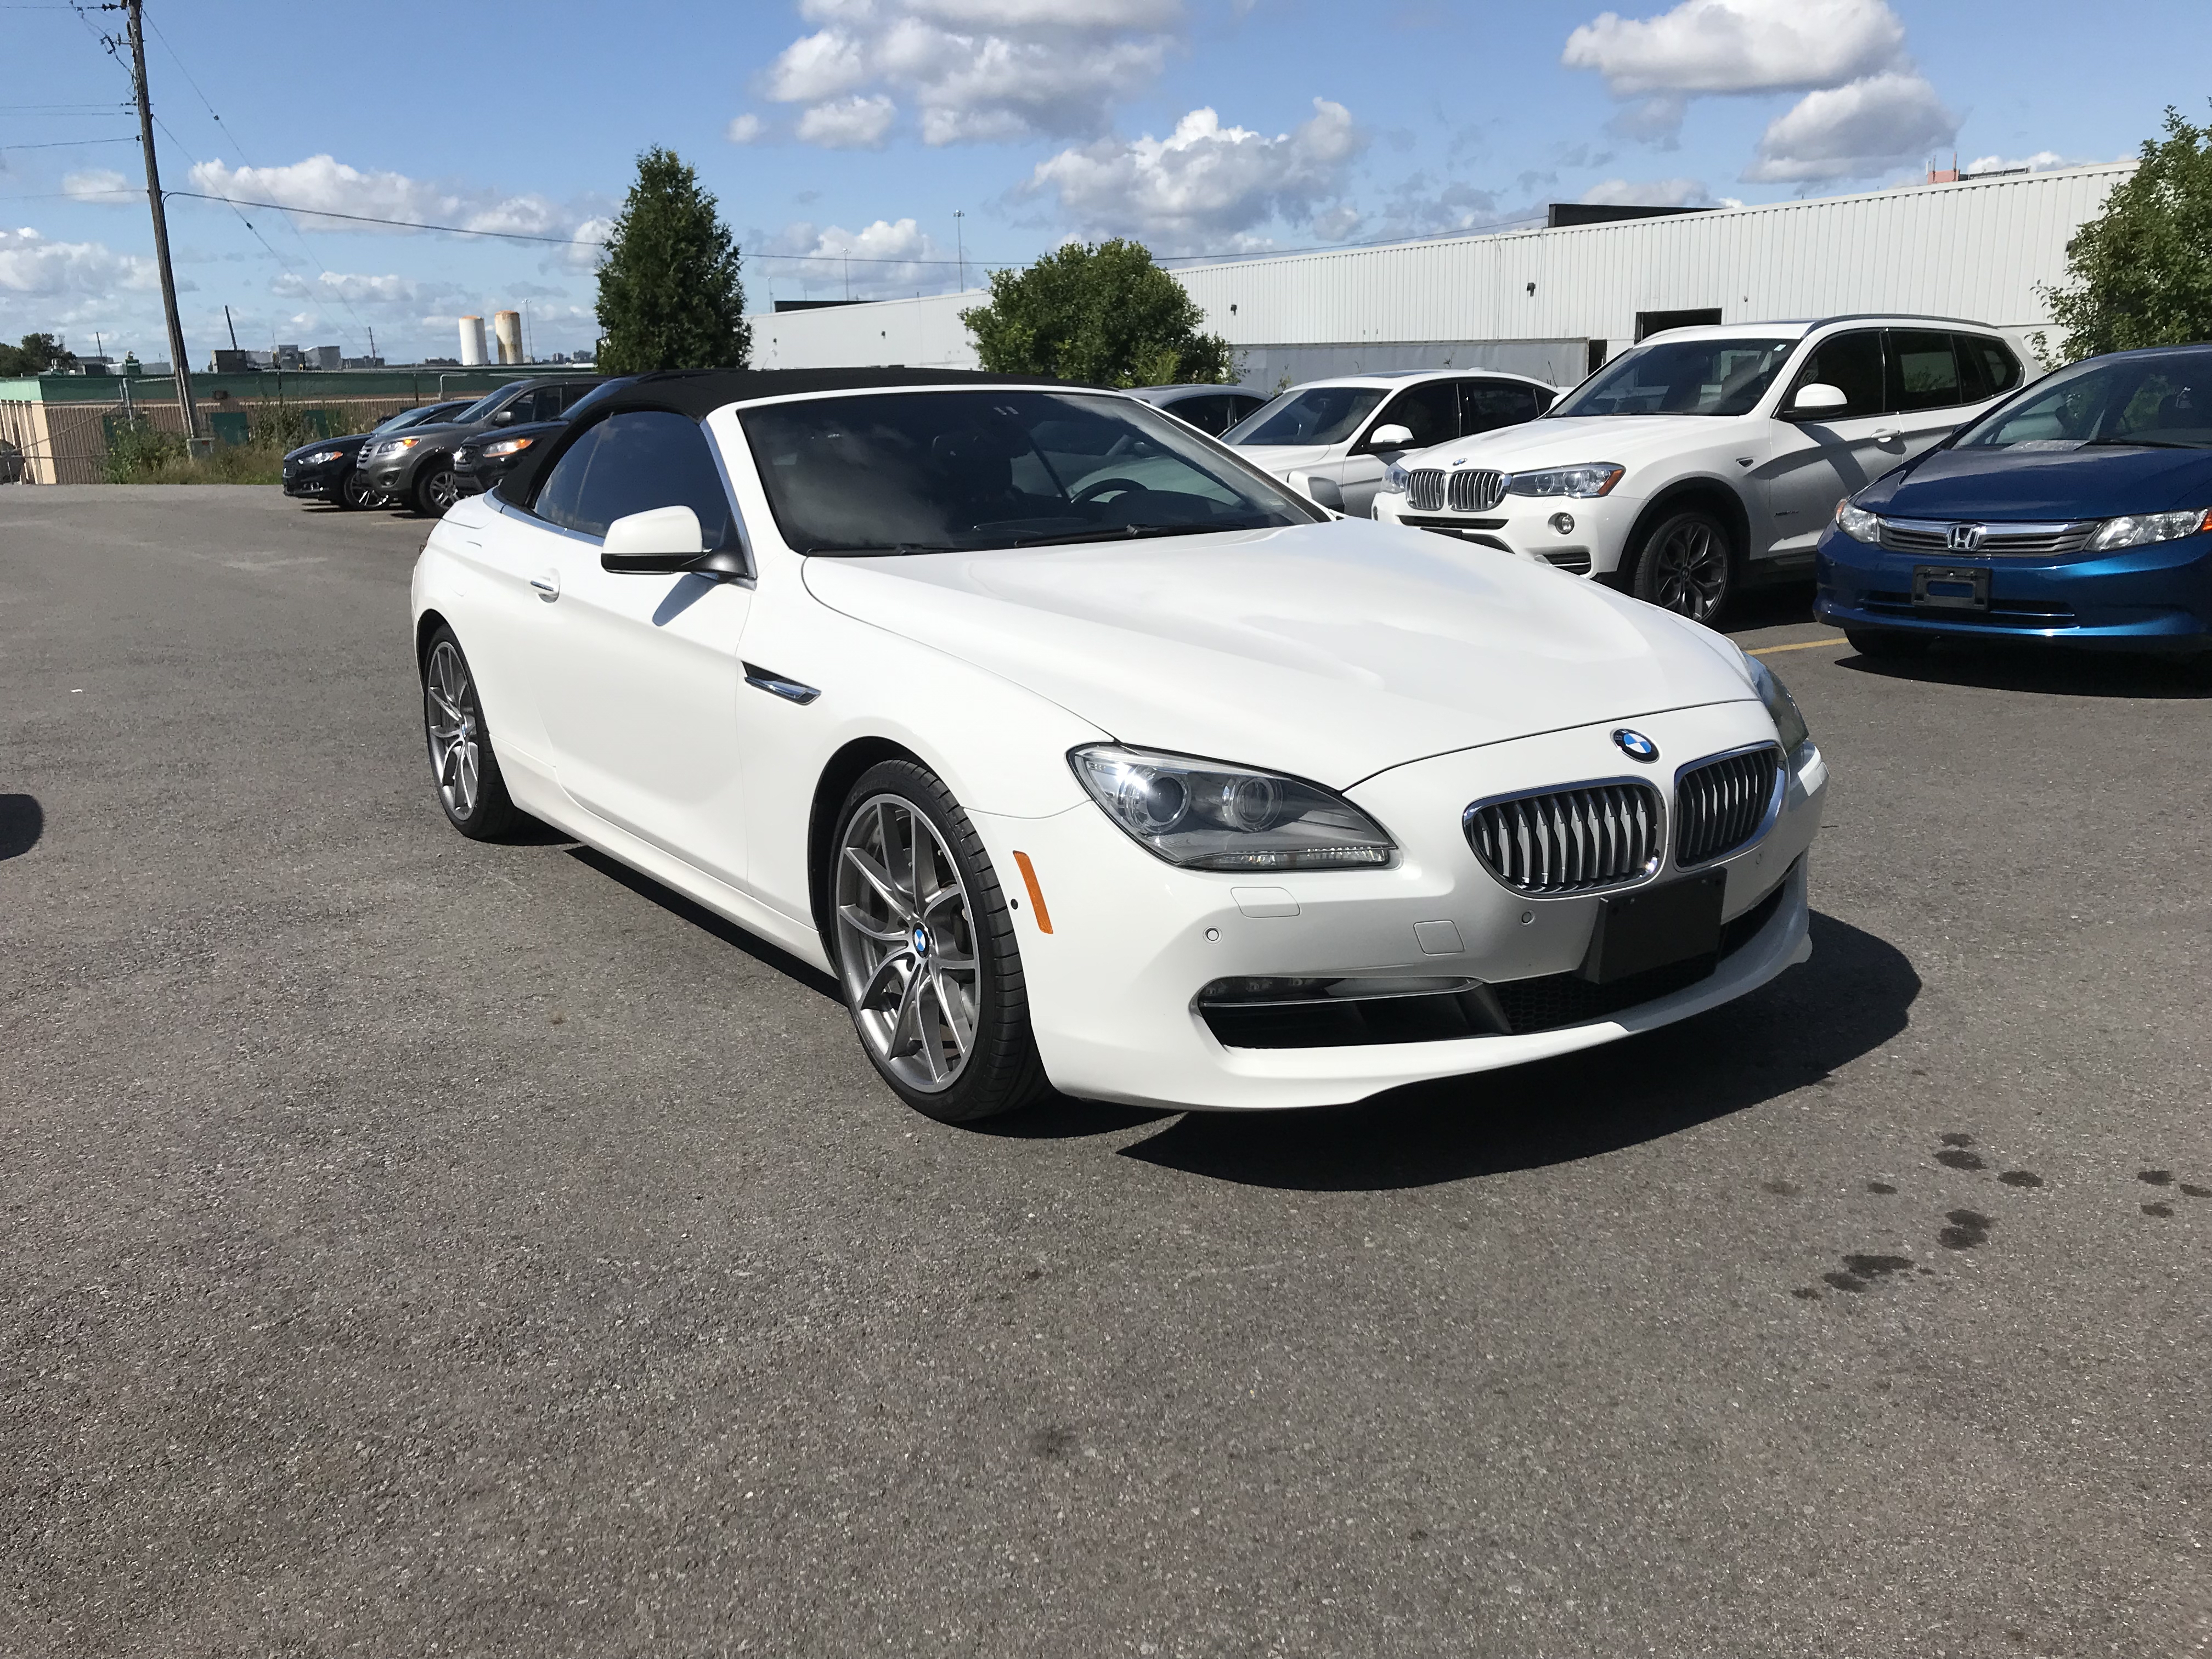 2012 BMW 650i Convertible Premium Package Automatic 95000KM - Final